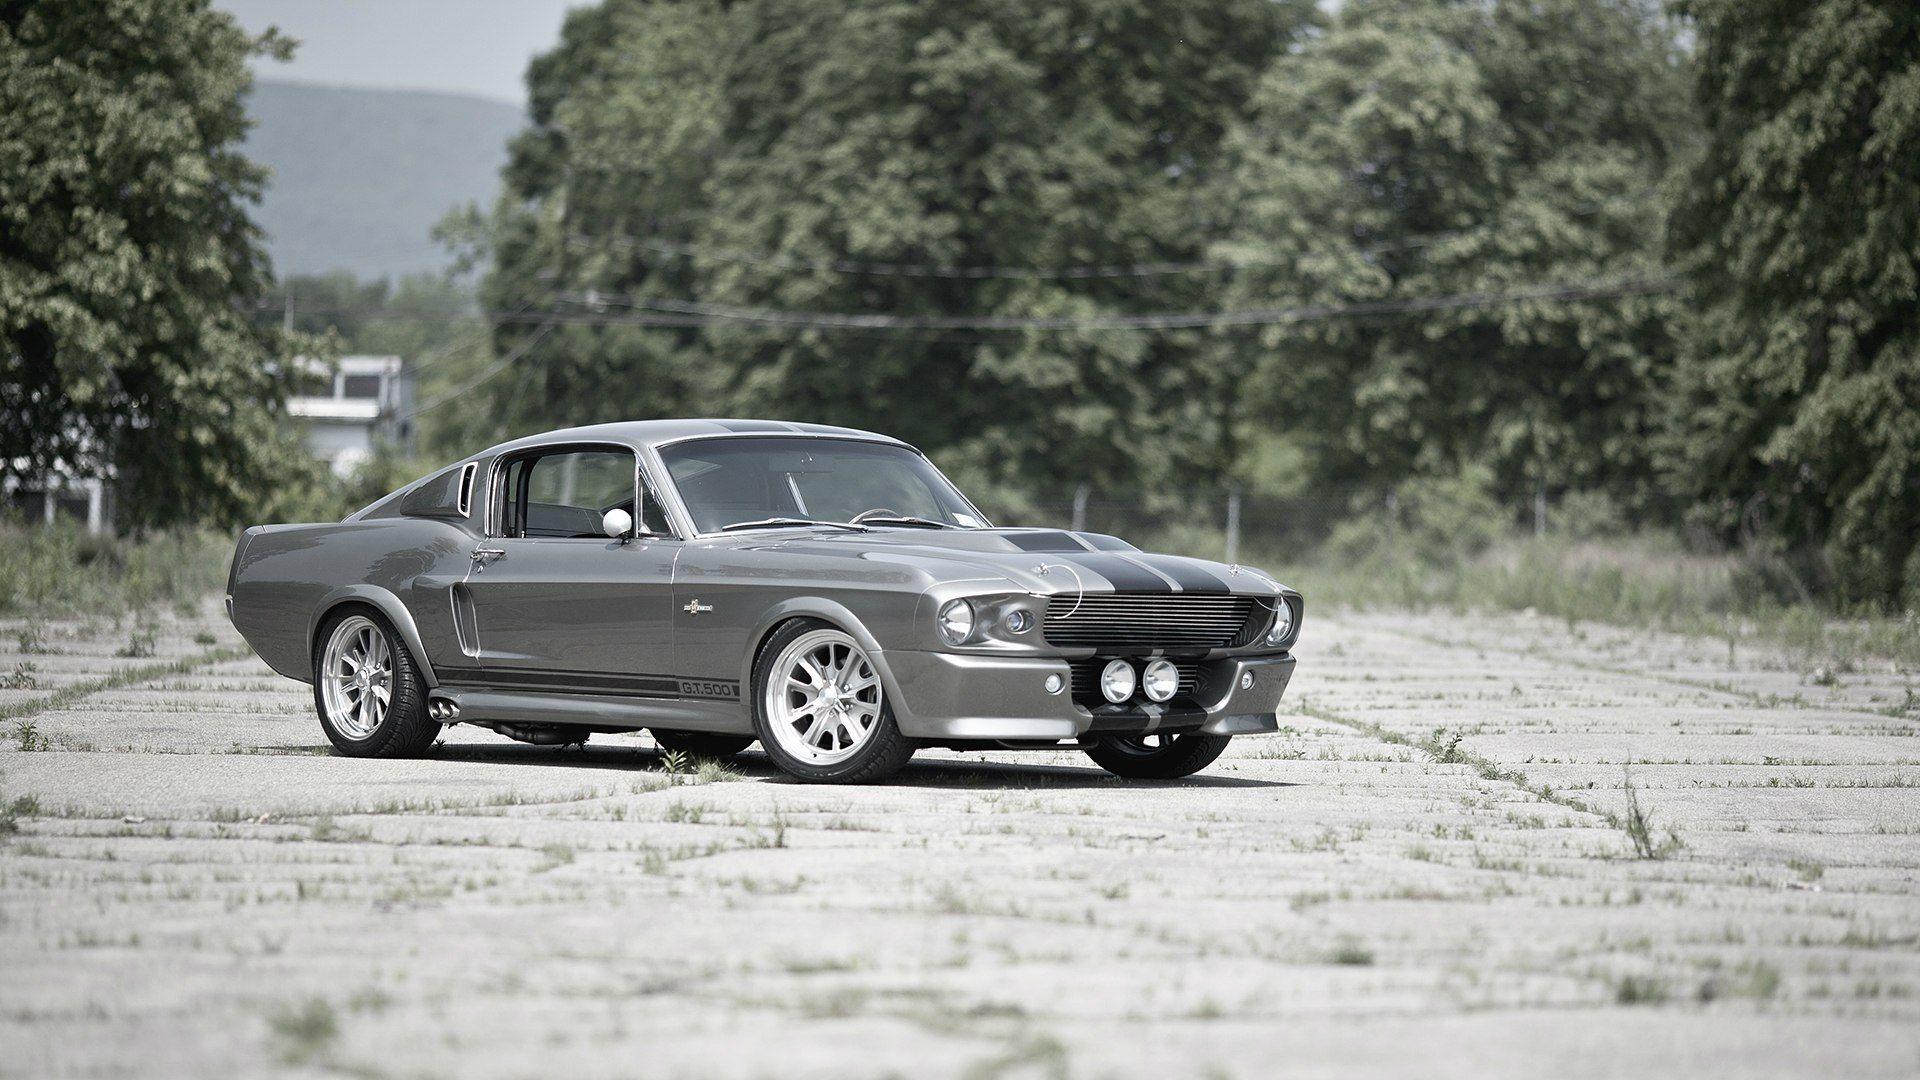 Ford Mustang Shelby GT500 Fastback